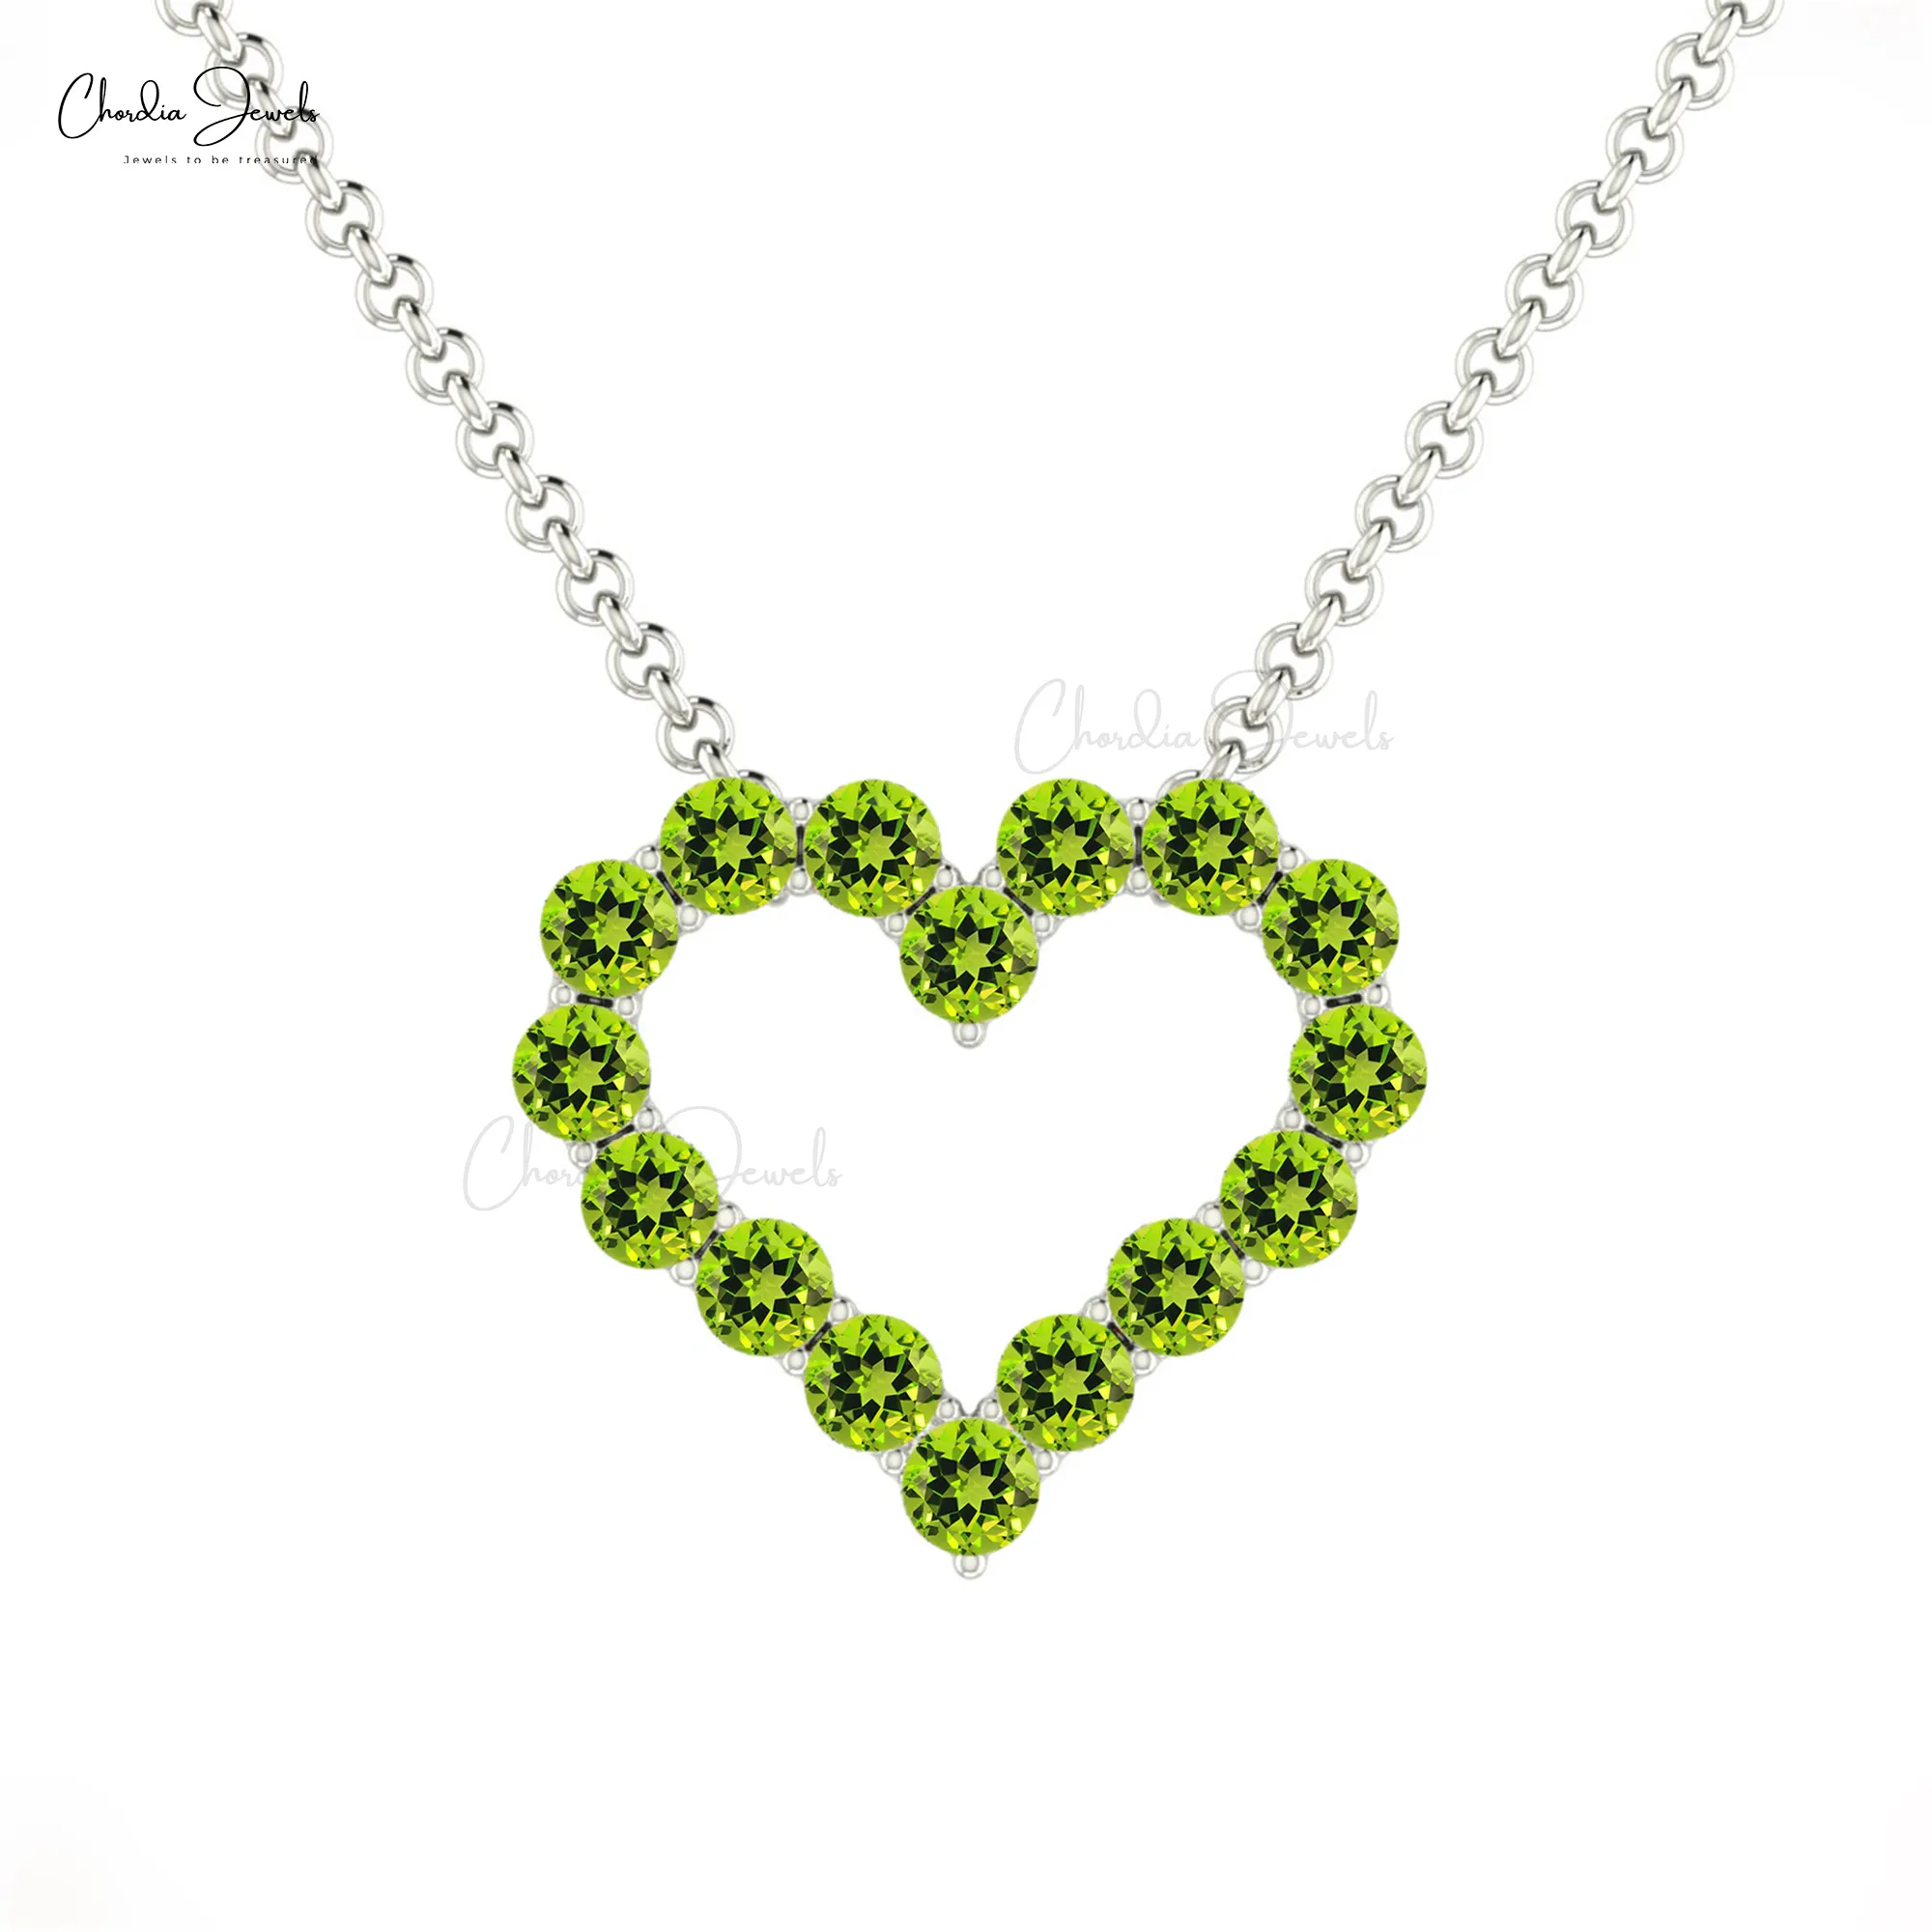 Natural Peridot Heart Shape Necklace 14k Solid Gold Handmade 2mm Round Peridot Necklace at Affordable Price Wholesaler